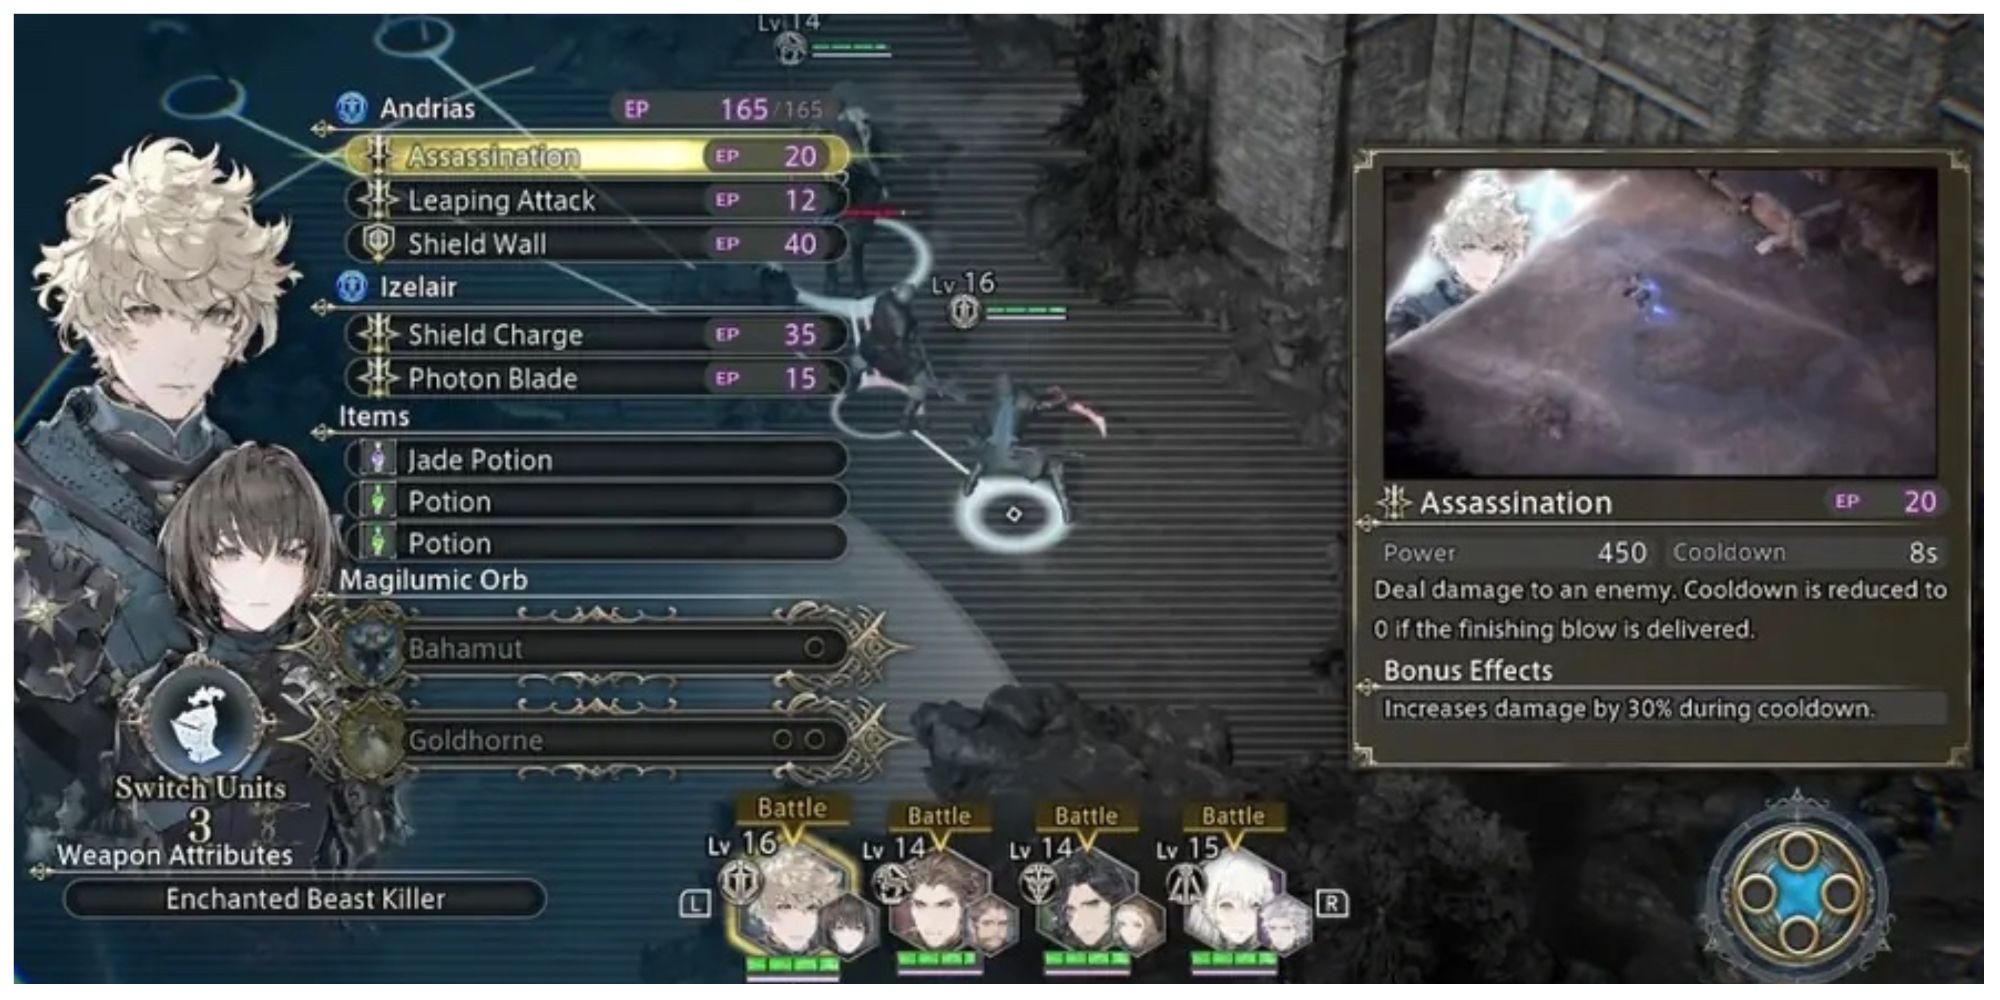 Screen showing Andrias active skills, including Assassination, in The DioField Chronicle